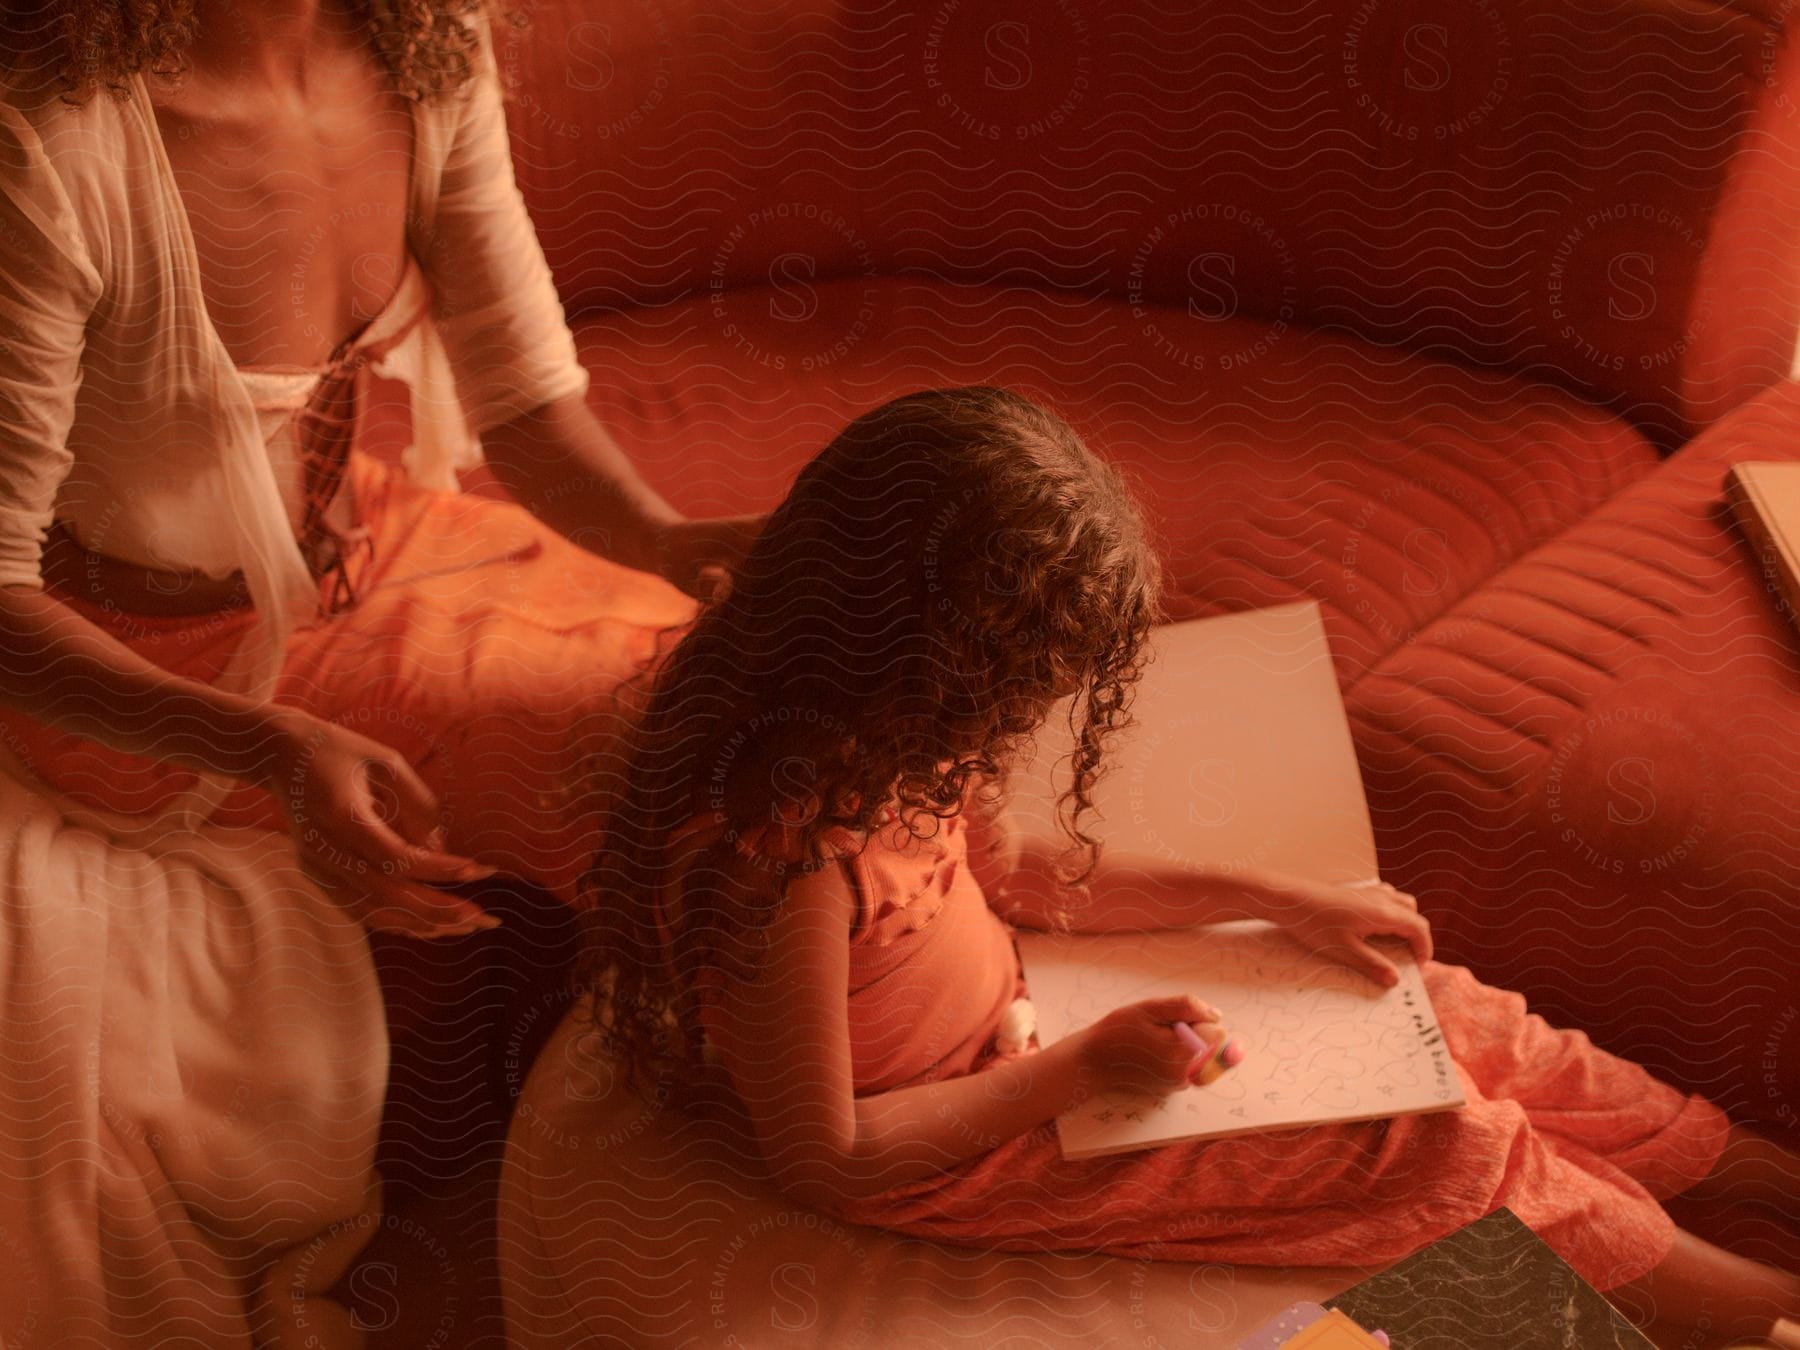 A mother fixing her daughter's curly hair while she draws.